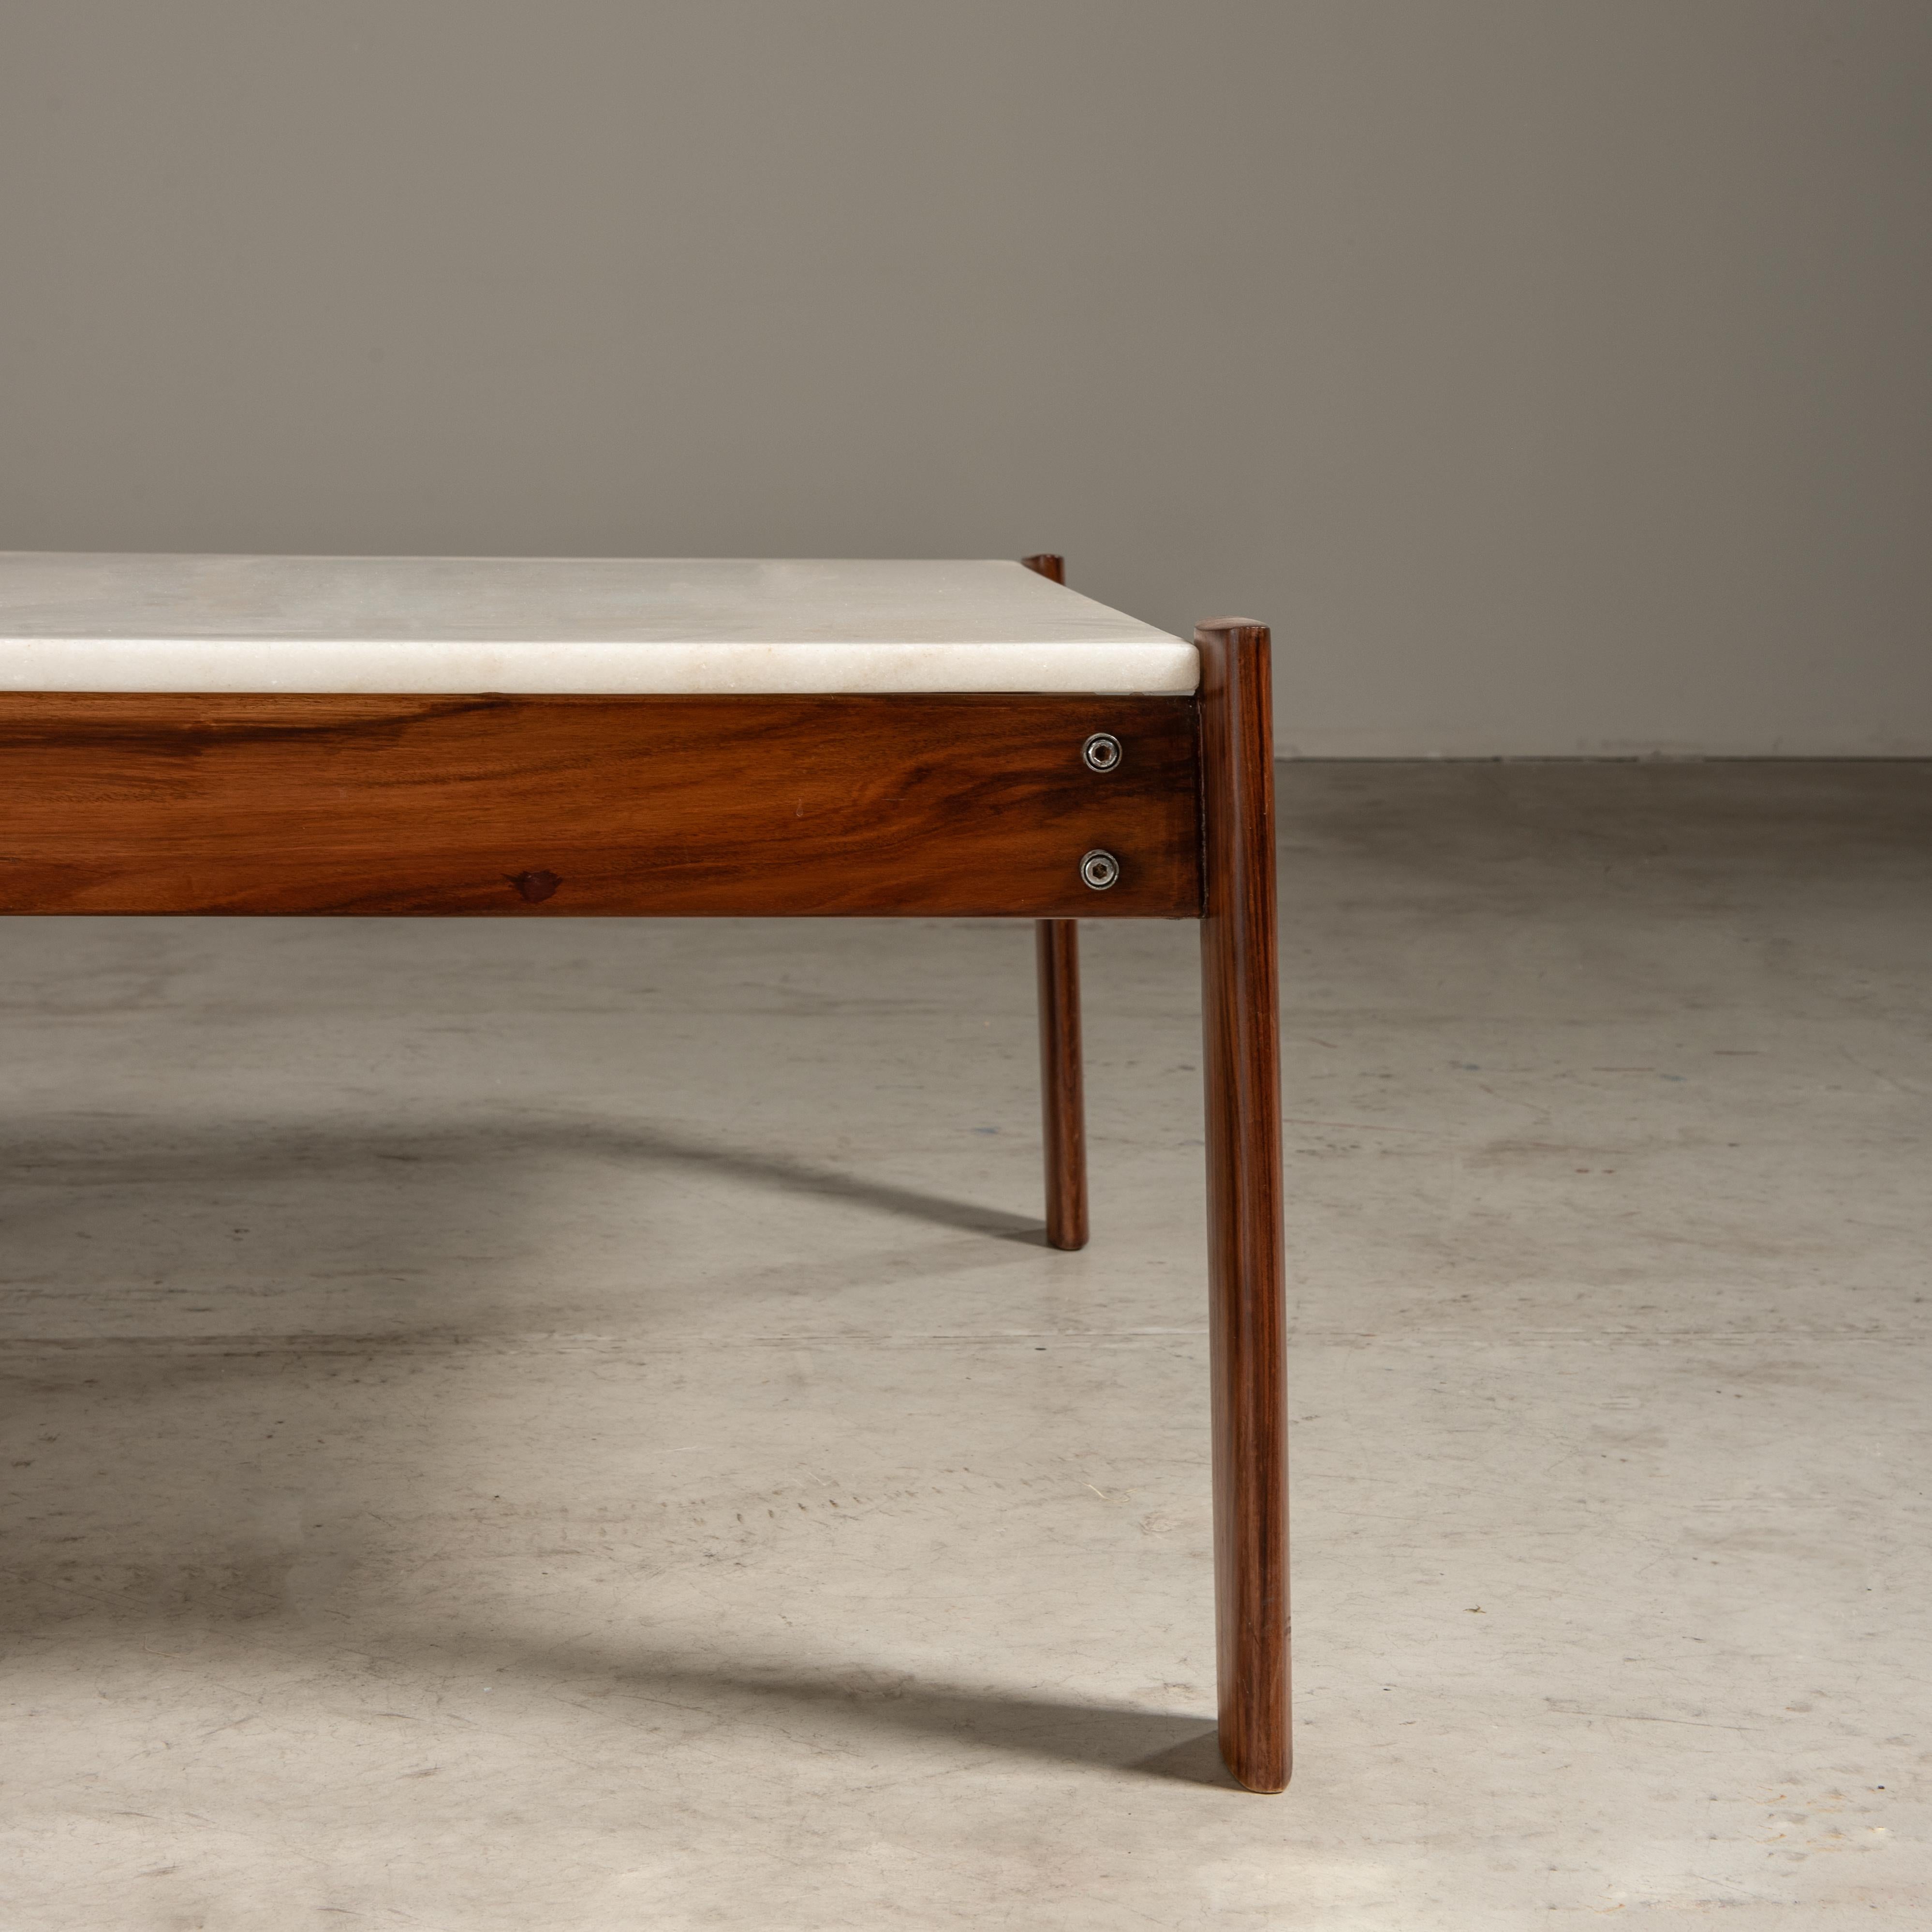 'MP- 51' Coffee Table in Marble, by Percival Lafer, Brazilian Mid-Century Modern In Good Condition For Sale In Sao Paulo, SP